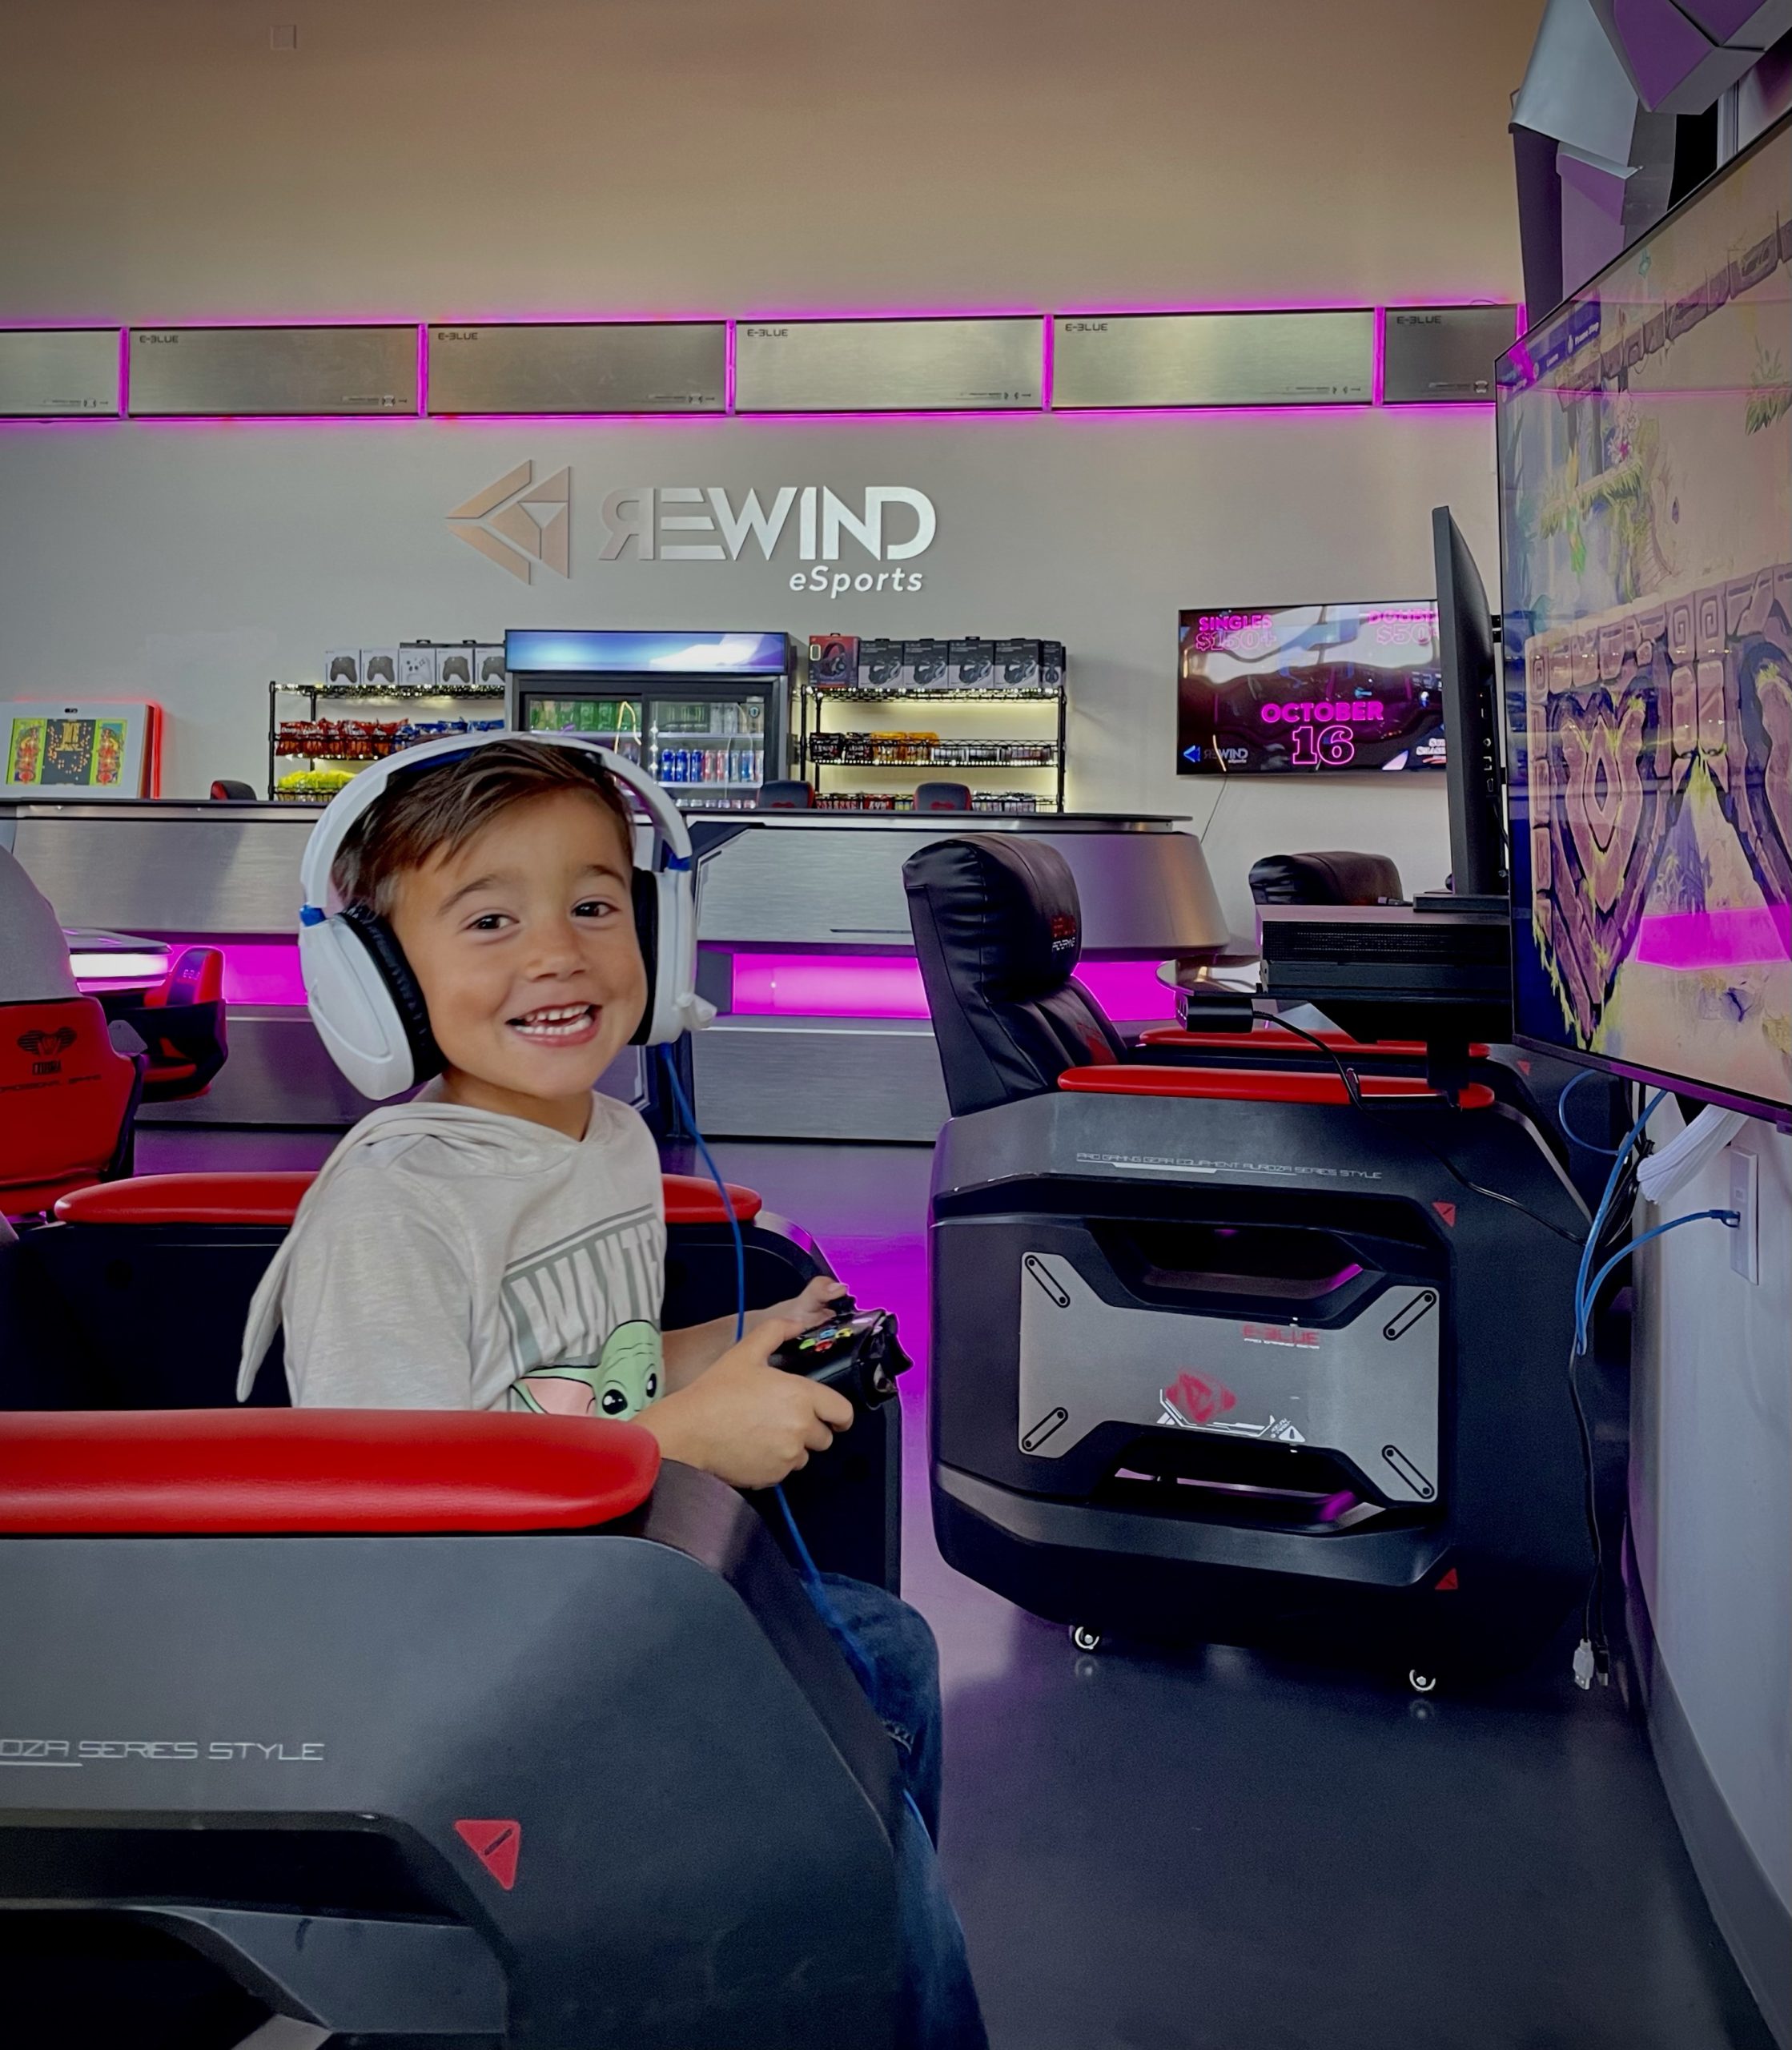 Everything you need to know about Rewind eSports in Broken Arrow